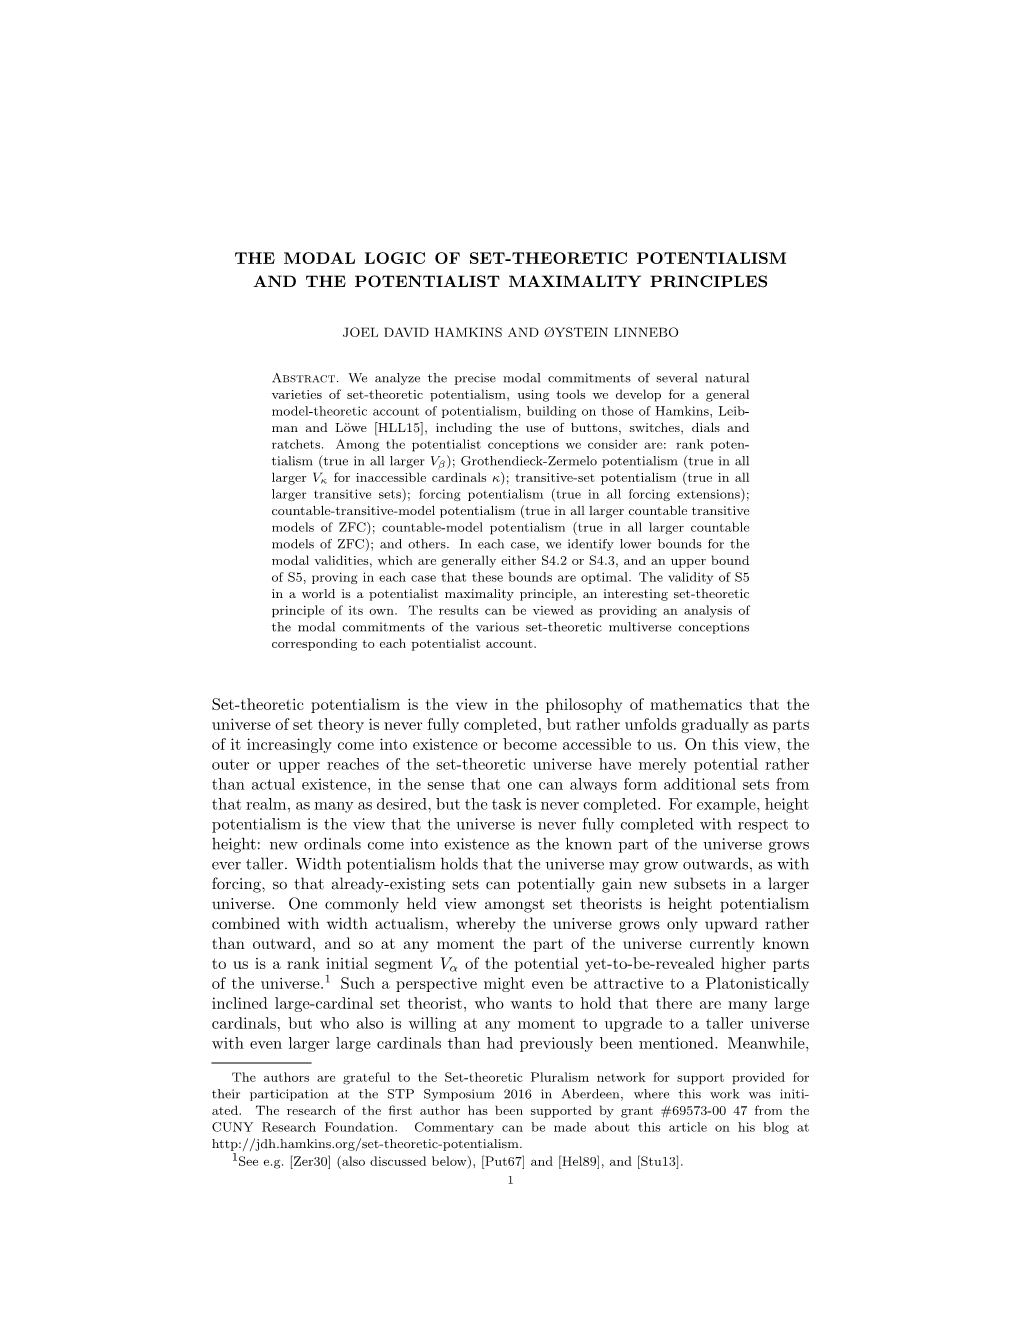 The Modal Logic of Set-Theoretic Potentialism and the Potentialist Maximality Principles